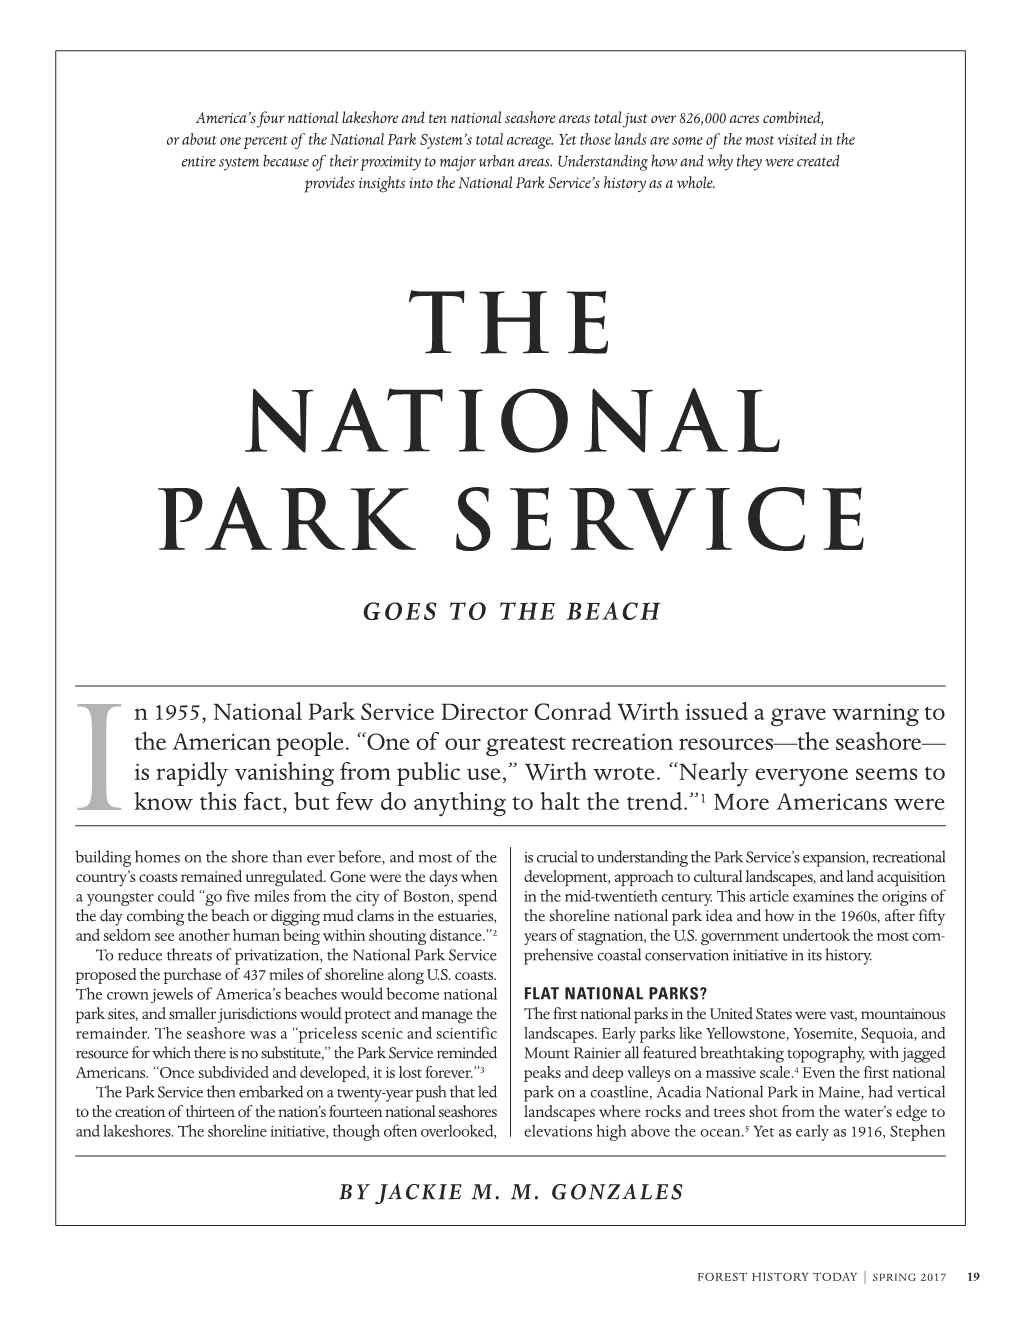 The National Park Service Goes to the Beach